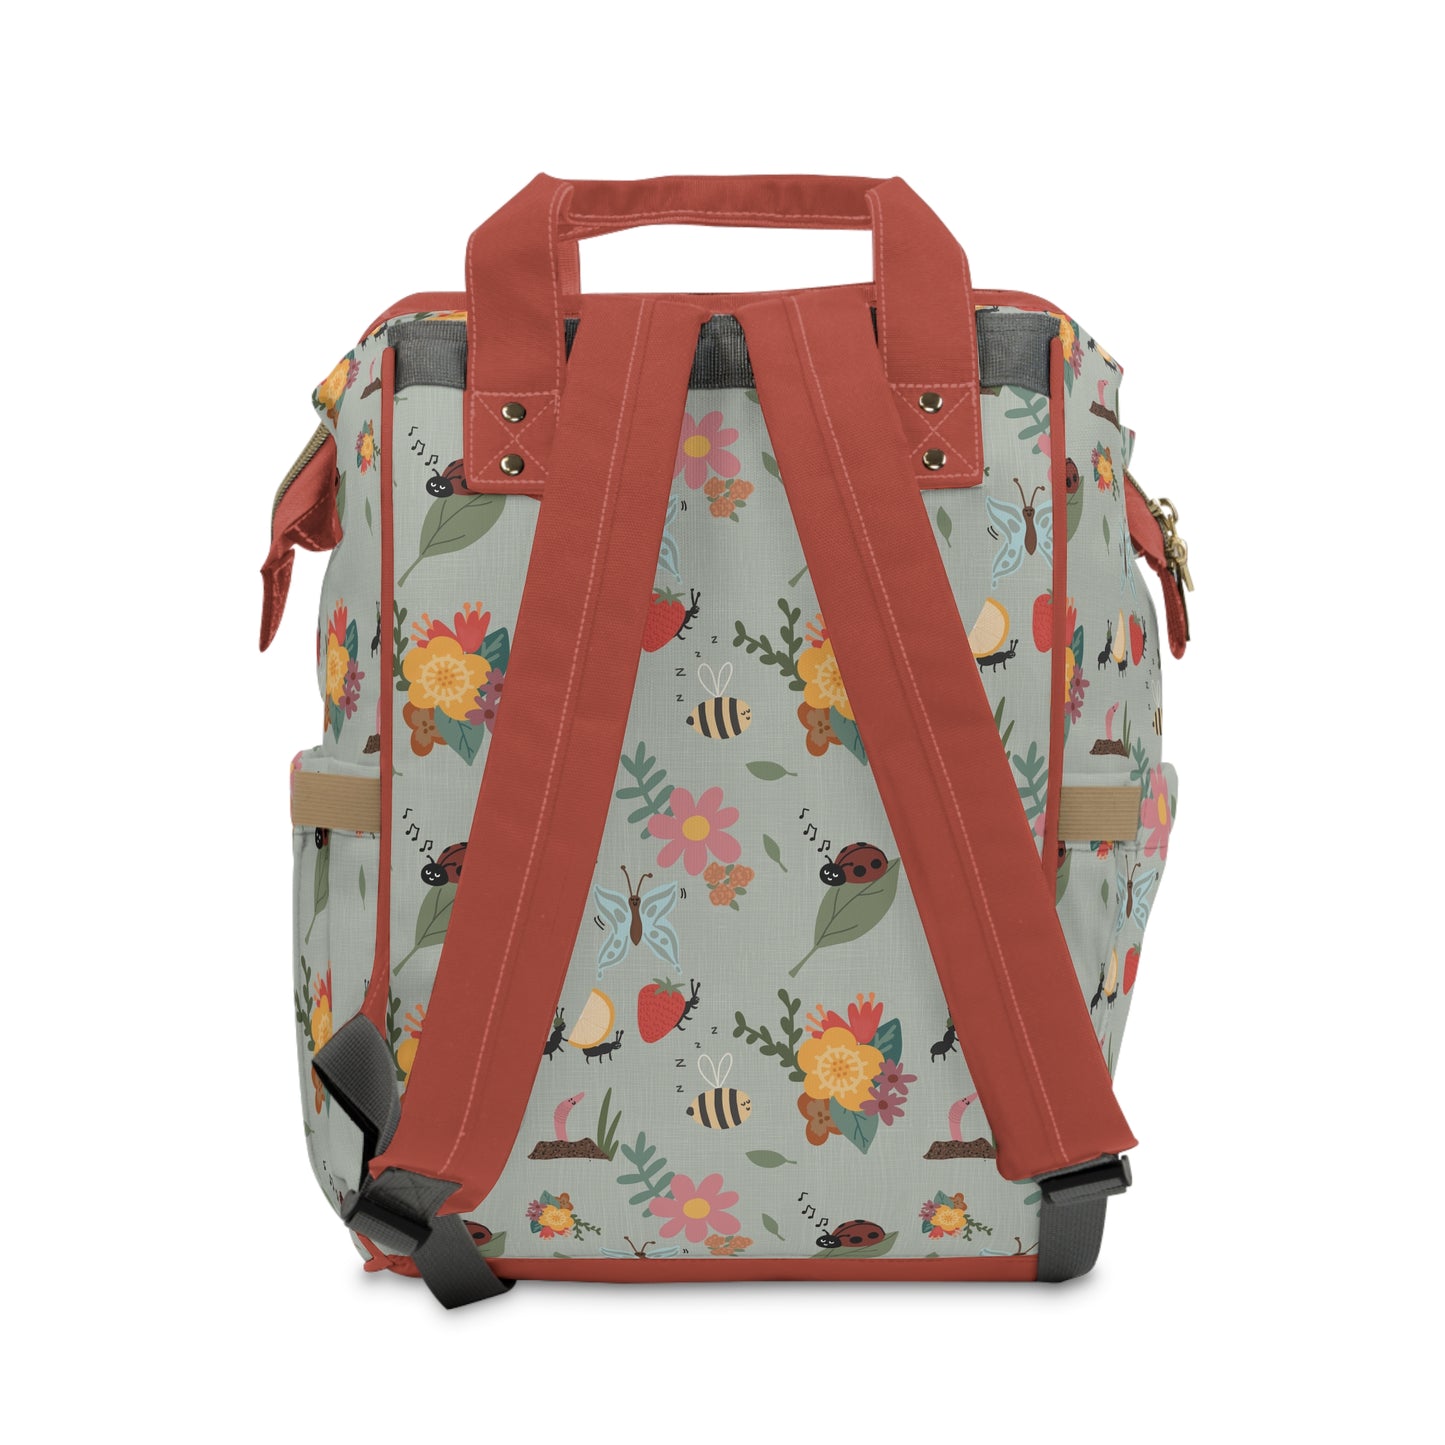 Insect-themed unique baby changing backpack with charming bug illustrations.